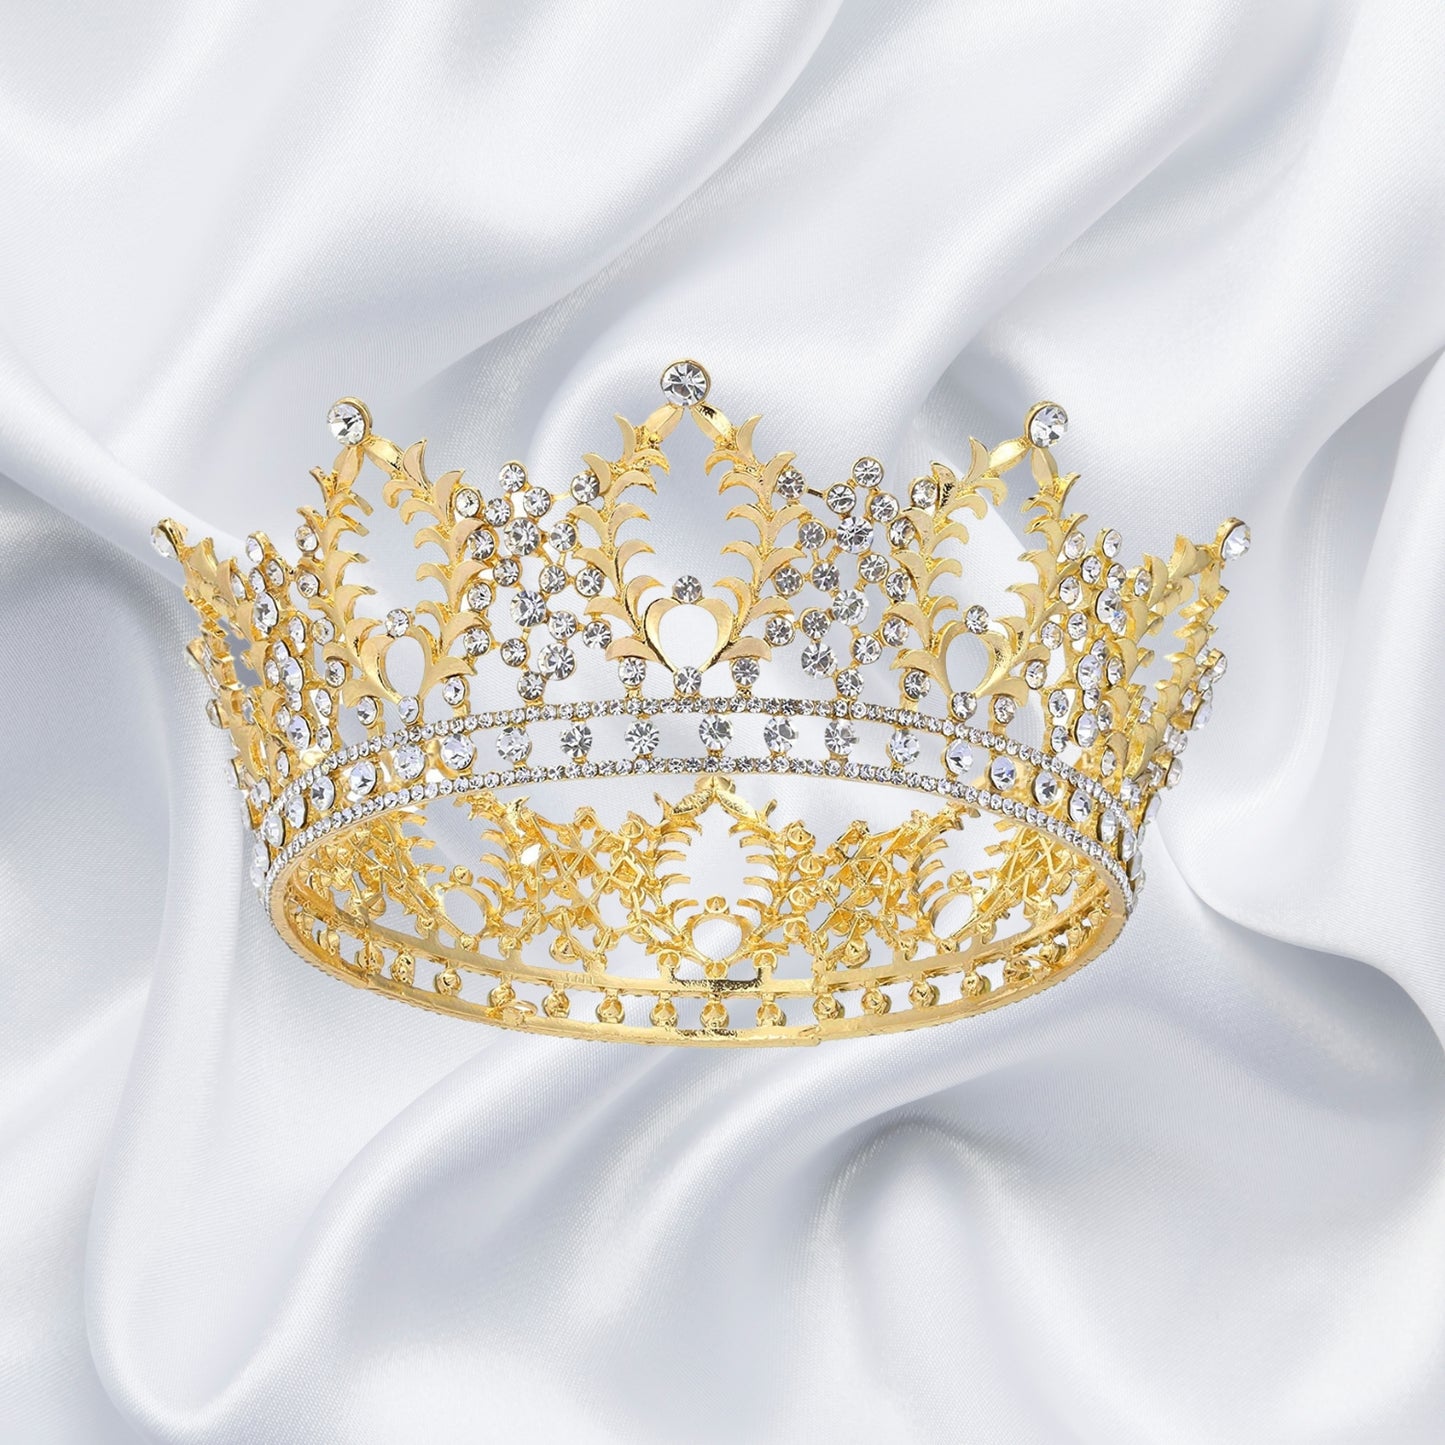 Royal King Crown for Men/Women (Unisex) - Metal Prince Crowns and Tiaras, Full Round Birthday Party Hats